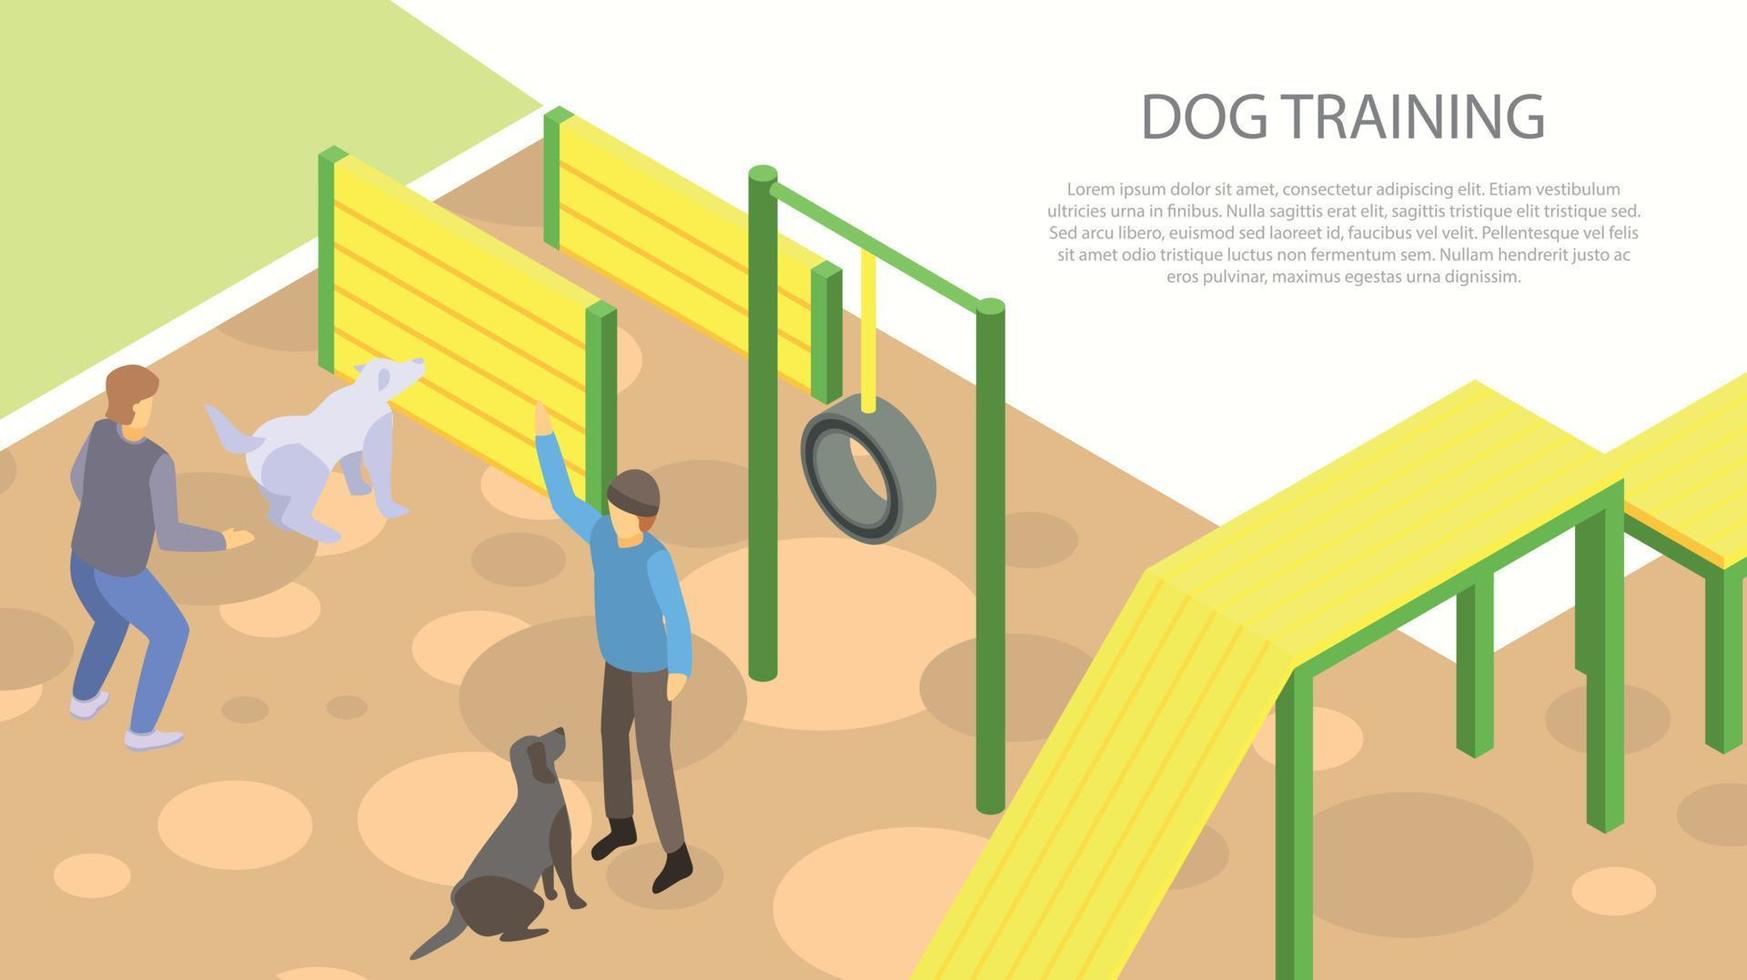 Dog training concept banner, isometric style vector